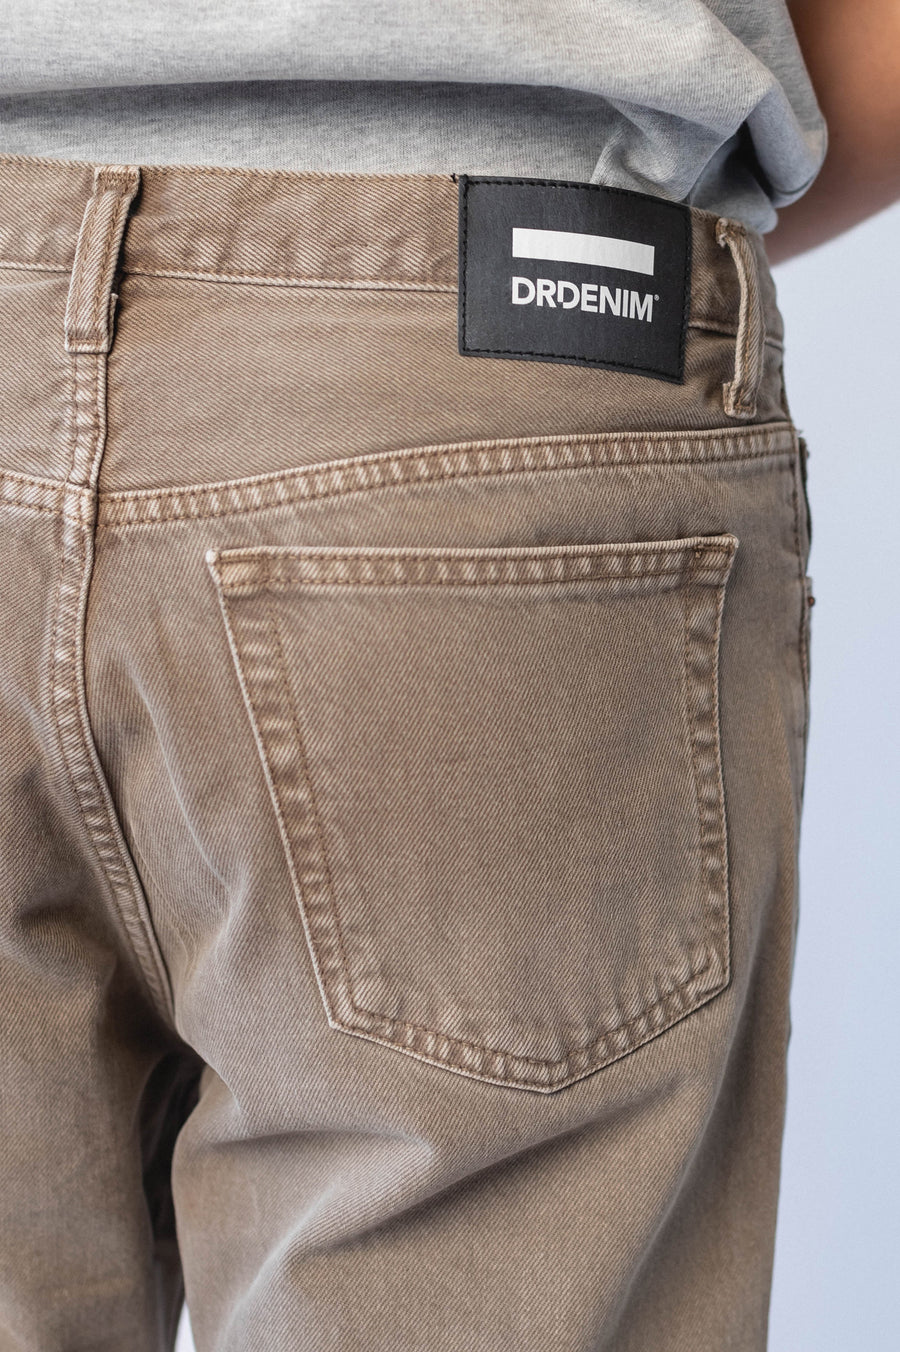 Dash Straight Jeans -Washed Sepia